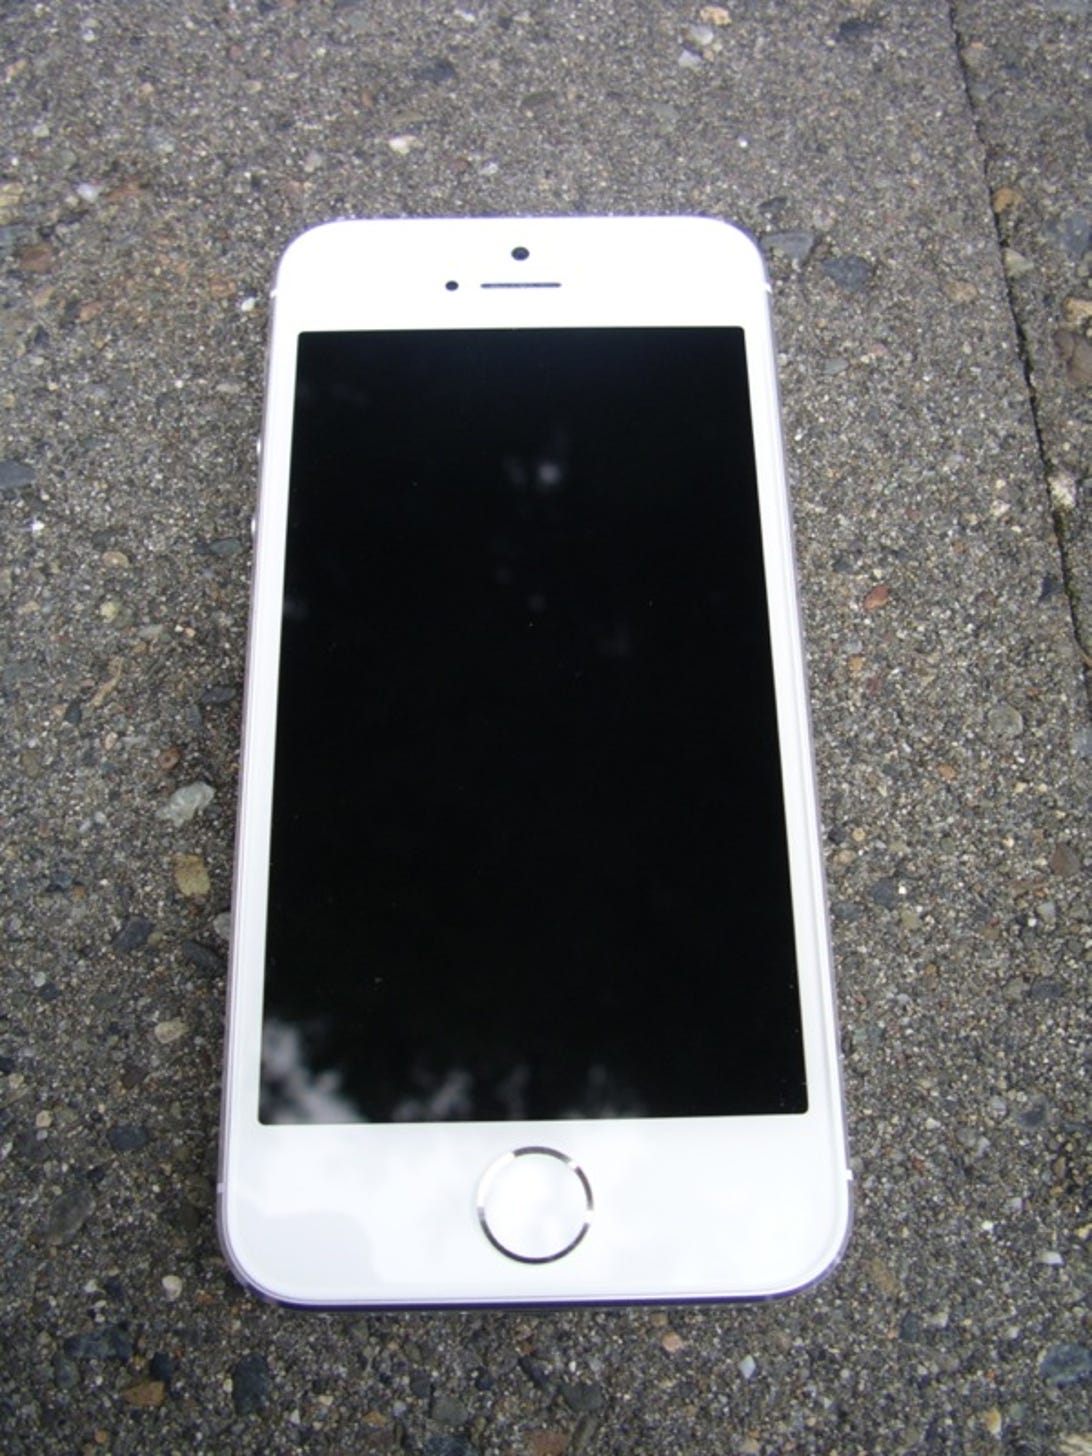 Apple iPhone 5s The best gets better | ZDNet